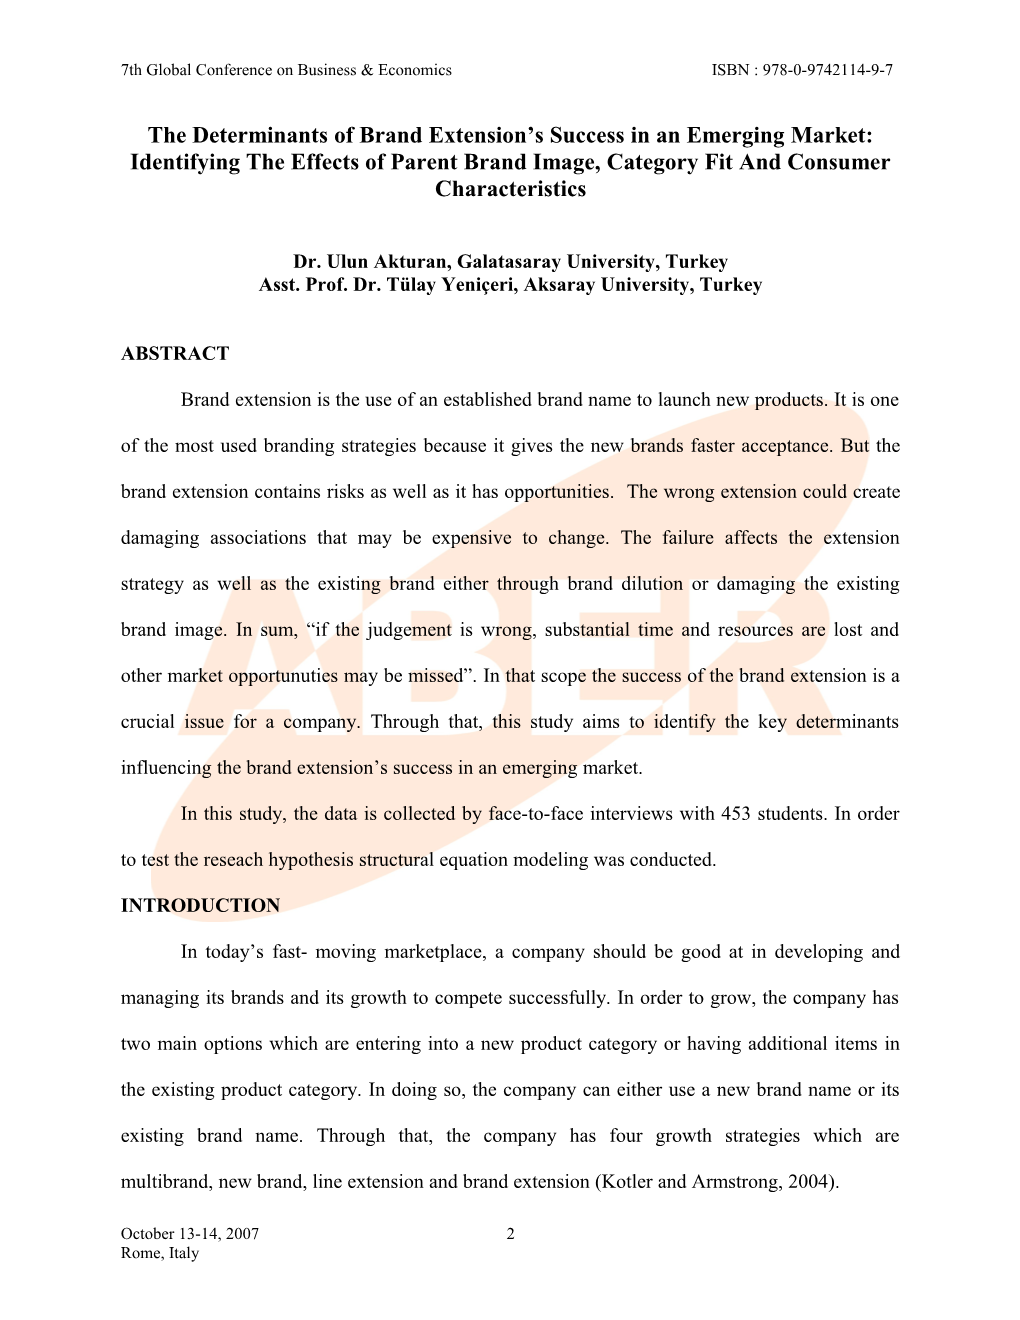 The Determinants of Brand Extension S Success in an Emerging Market: Identifying the Effects